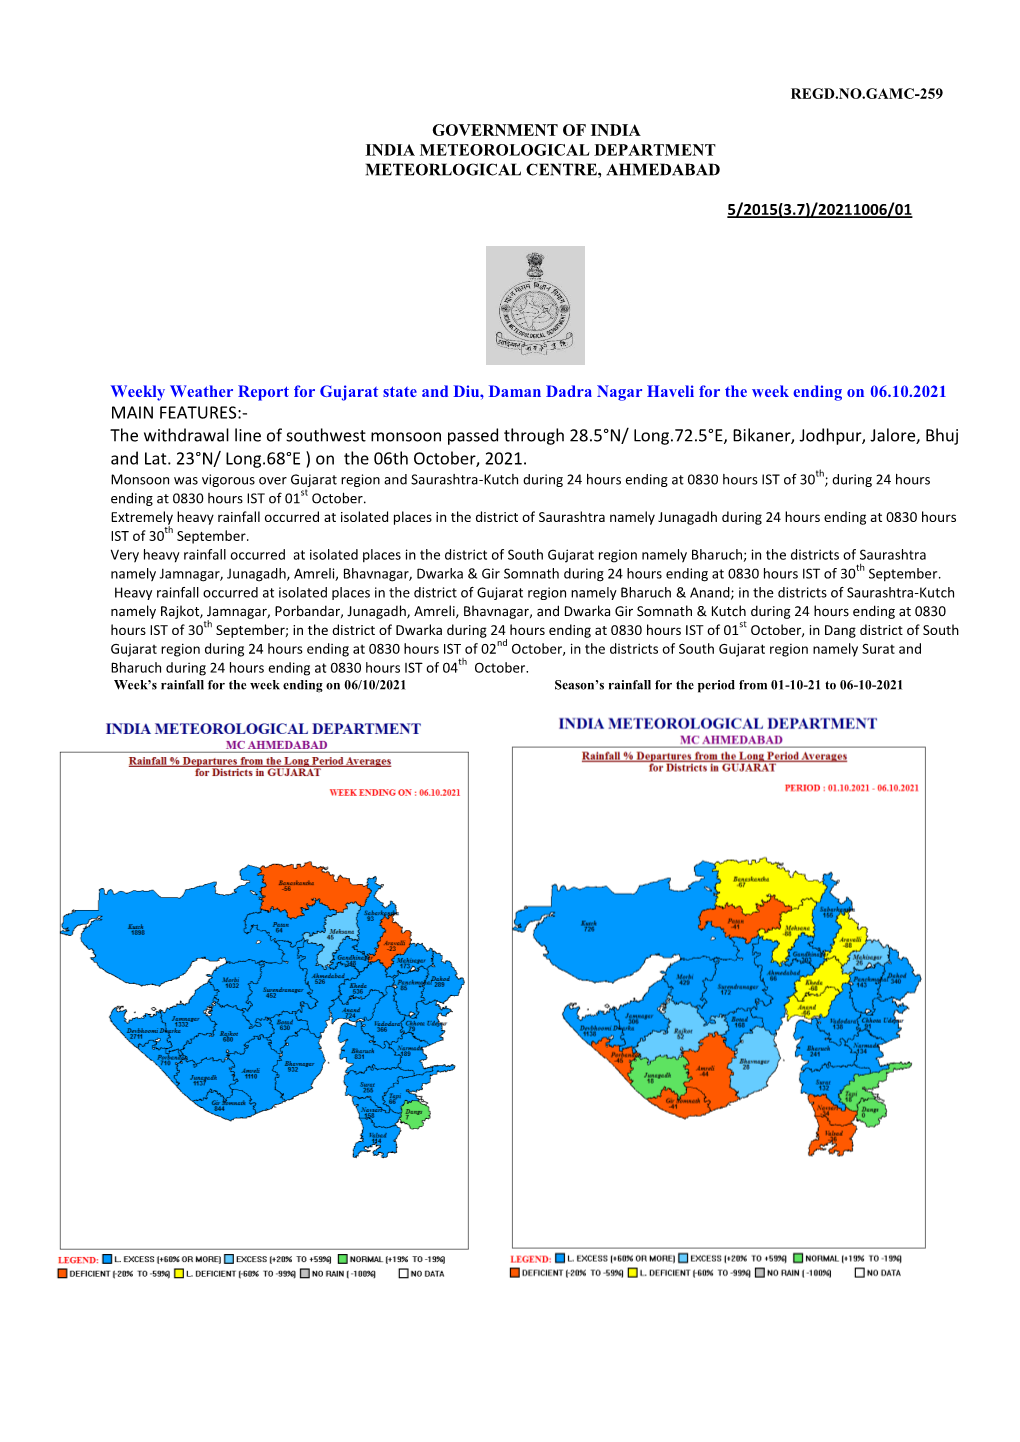 GOVERNMENT of INDIA INDIA METEOROLOGICAL DEPARTMENT METEORLOGICAL CENTRE, AHMEDABAD 5/2015(3.7)/20210825/01 Weekly Weather Repor